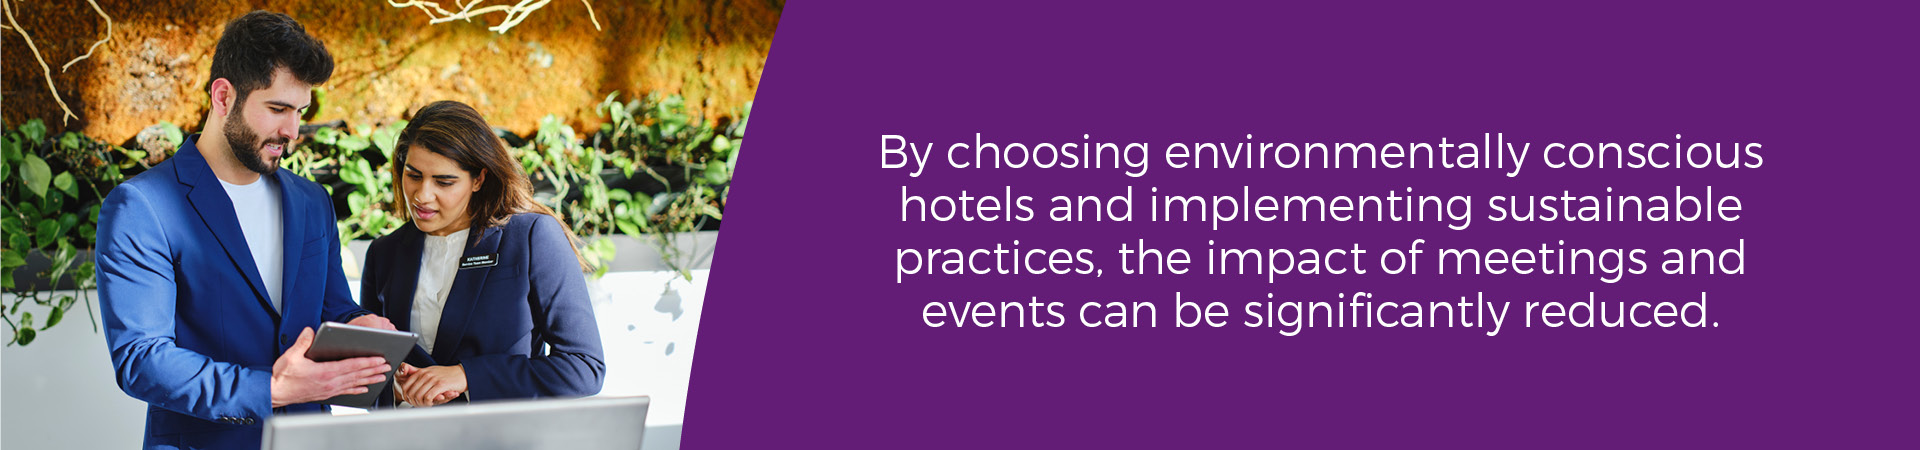 By choosing environmentally conscious hotels and implementing sustainable practices, the impact of meetings and events can be significantly reduced.